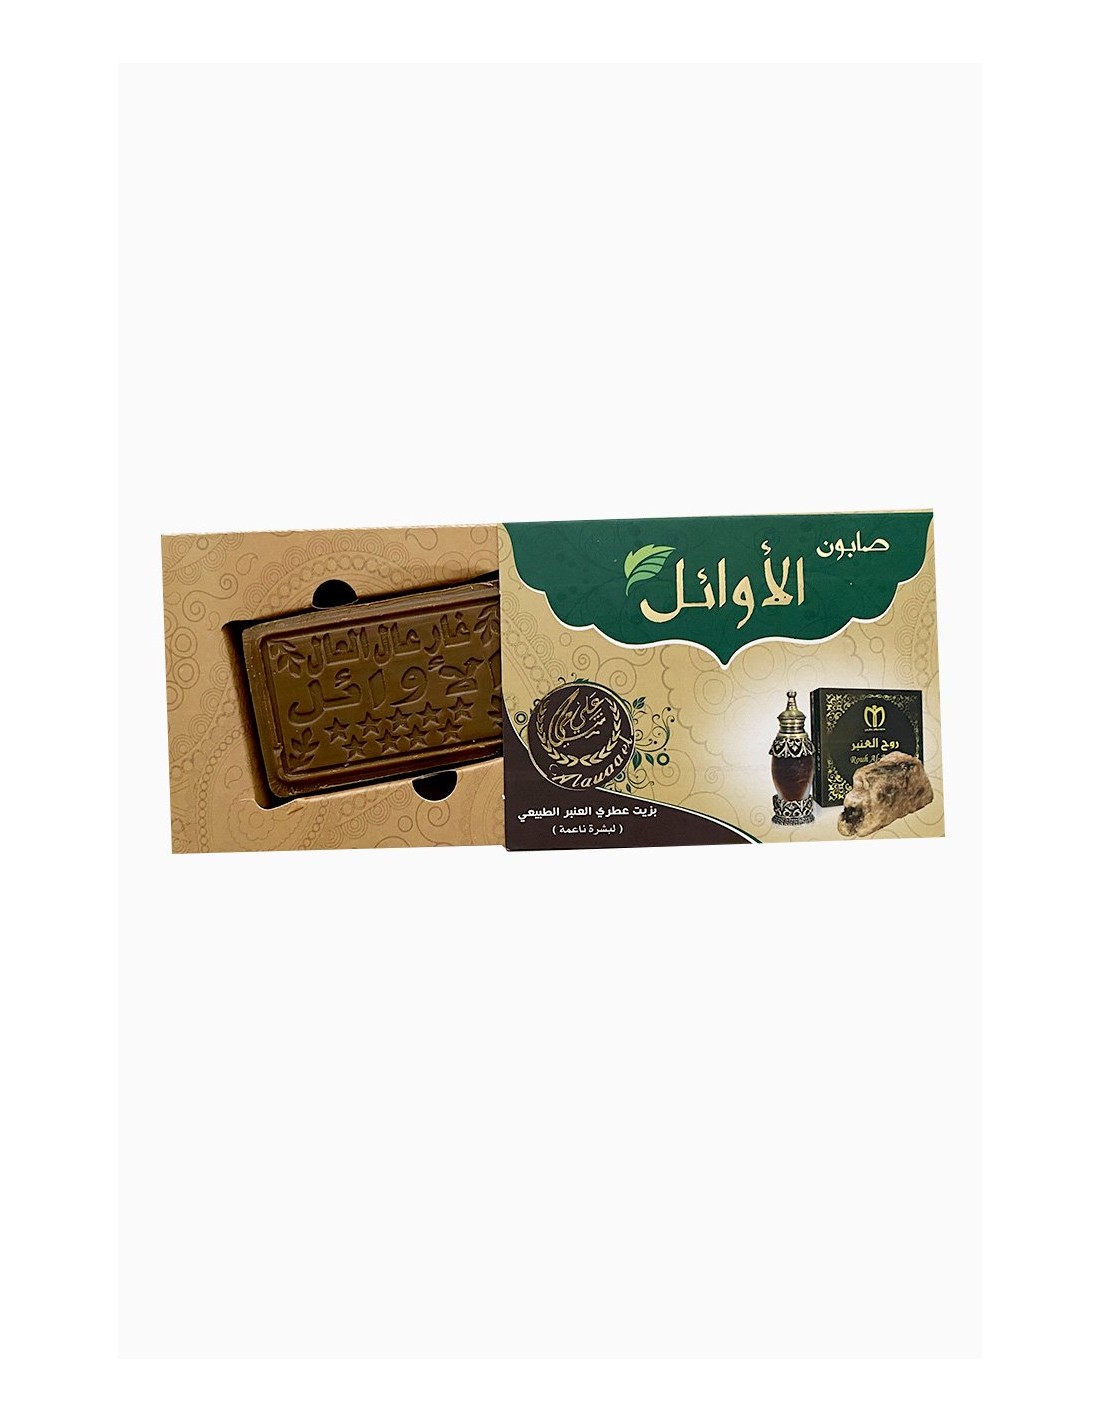 Aleppo soap with amber oil